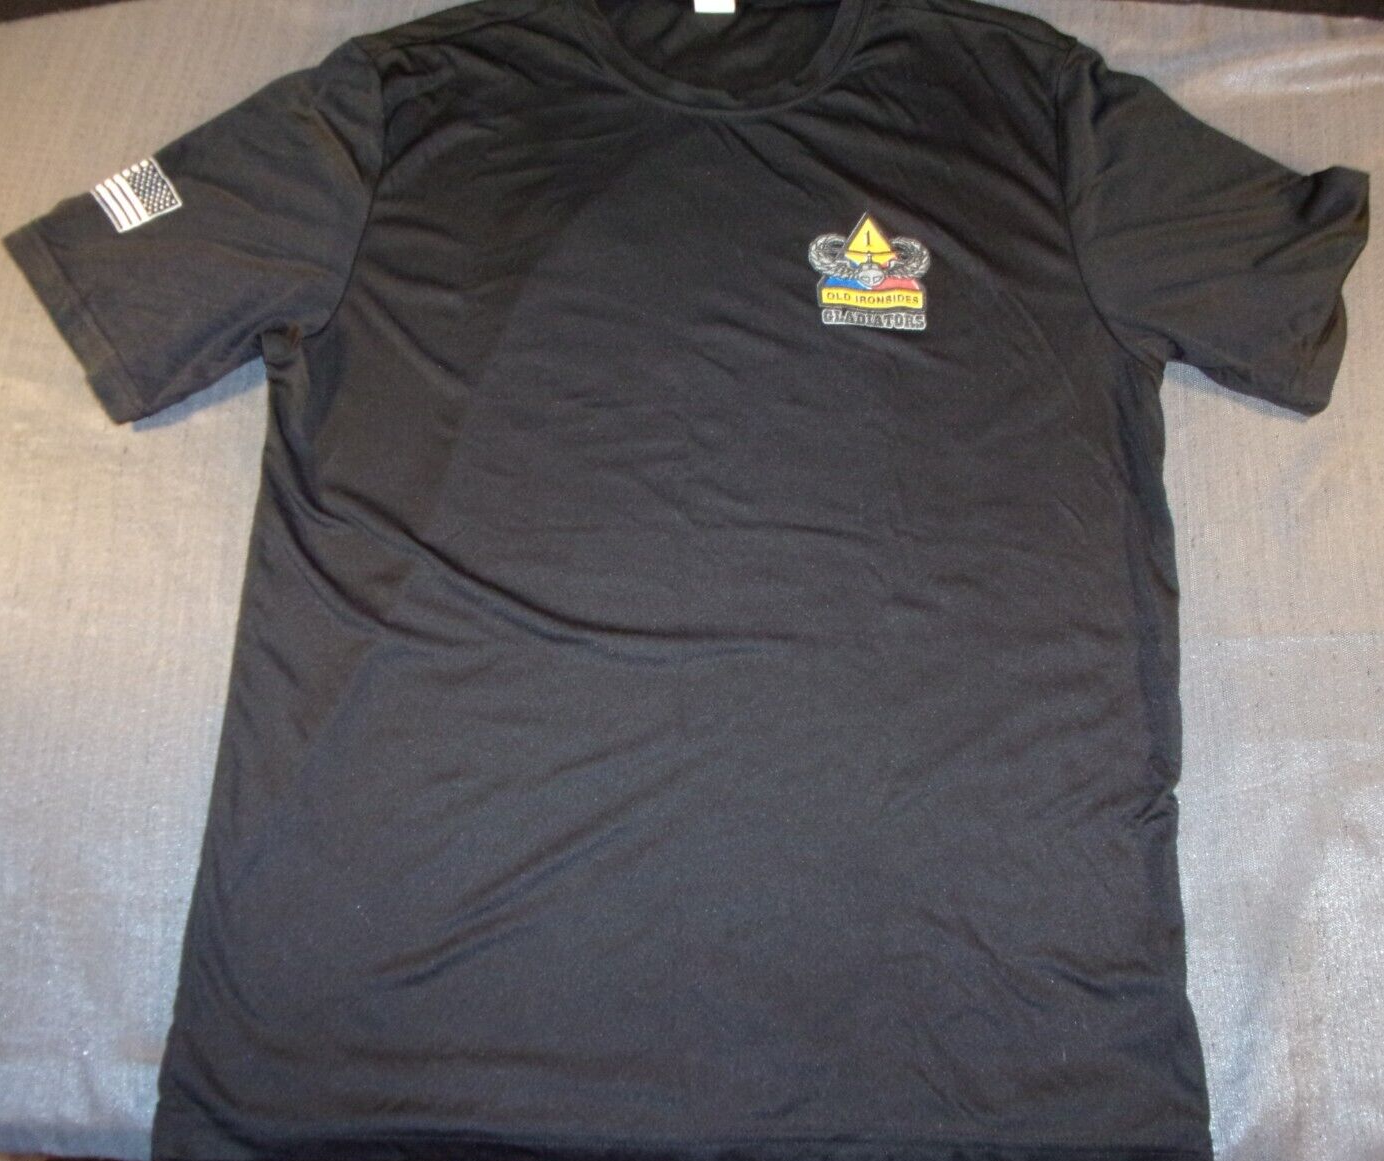 Primary image for DISCONTINUED UNIT " OLD IRONSIDES GLADIATORS" AIR AUSSALT BLACK T-SHIRT LARGE